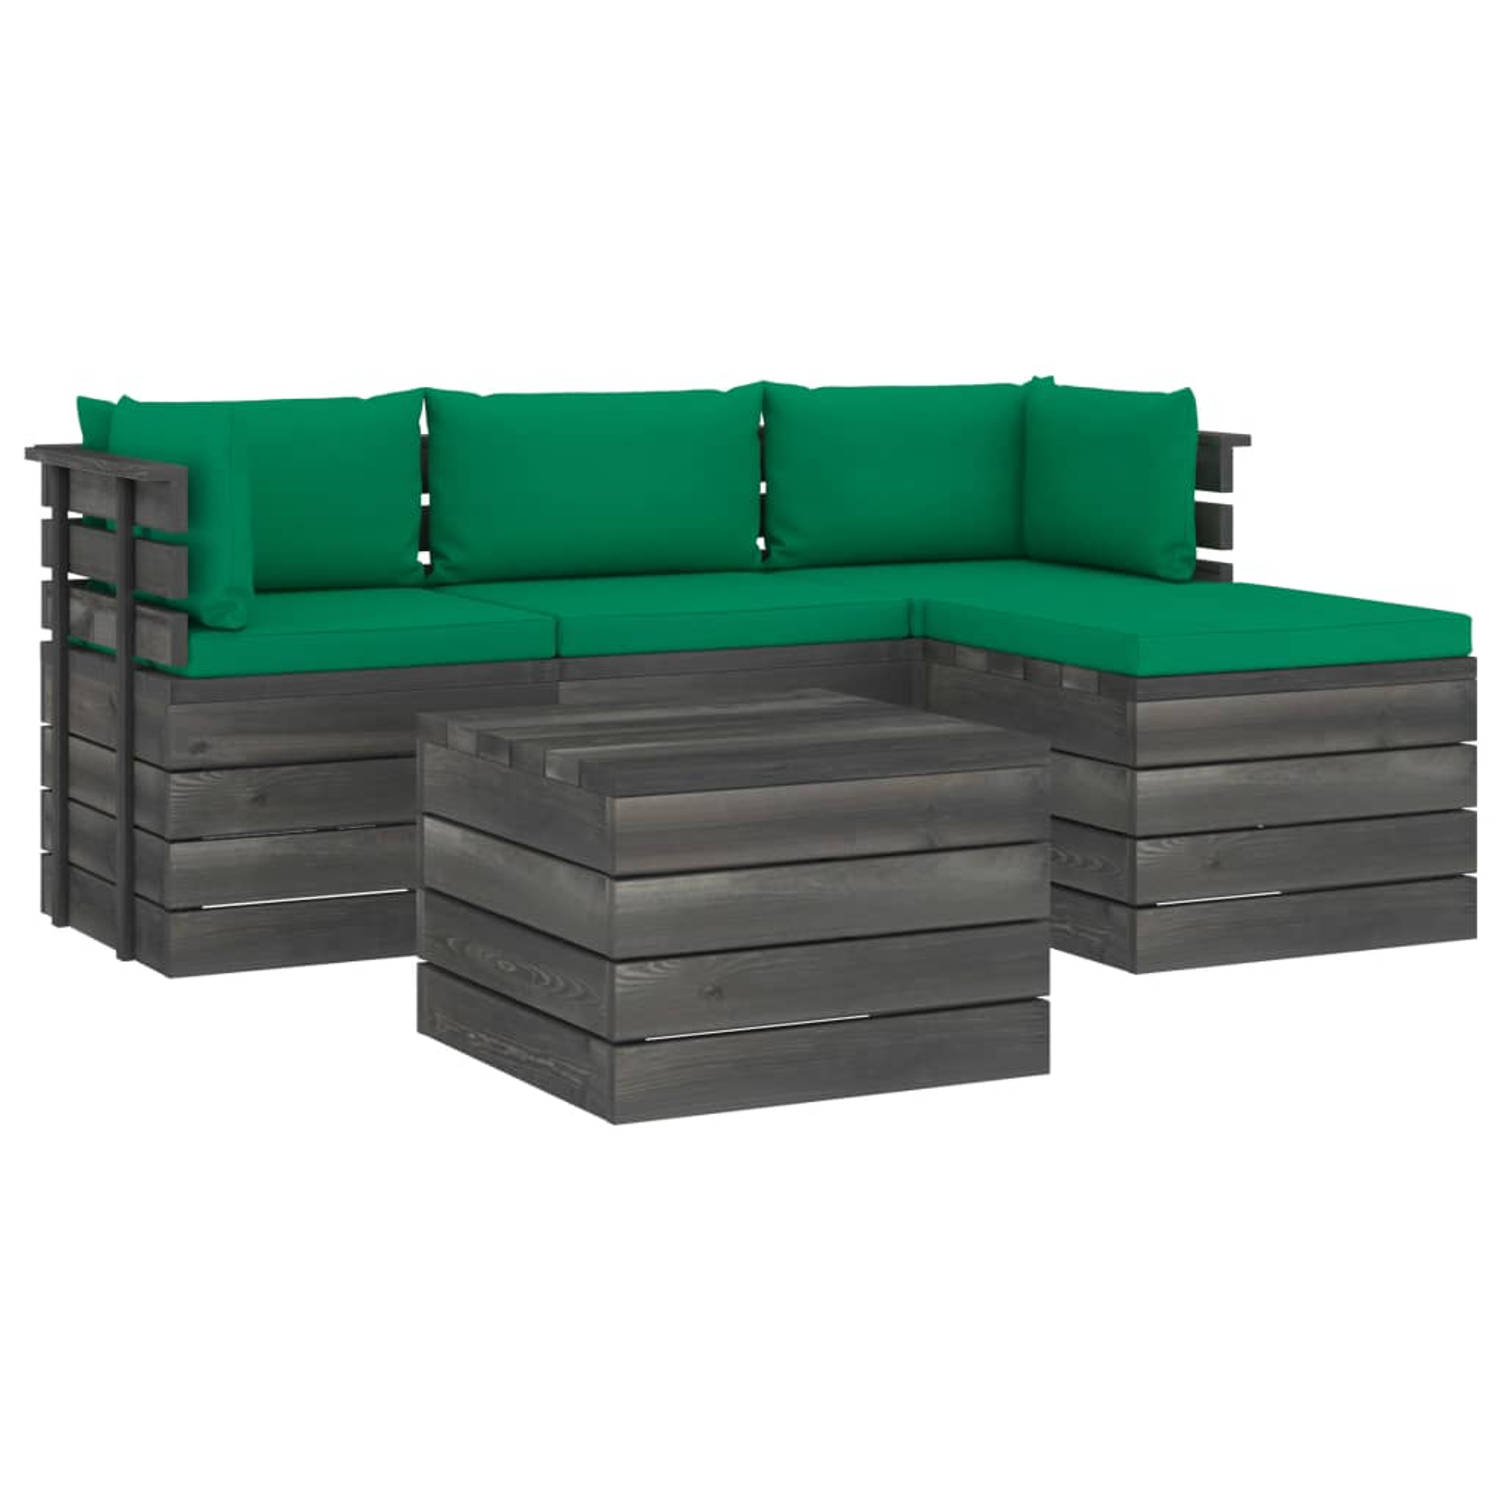 The Living Store Pallet Loungeset - Grenenhout - Tuinmeubelset - 60x65x71.5 cm - Groene kussens